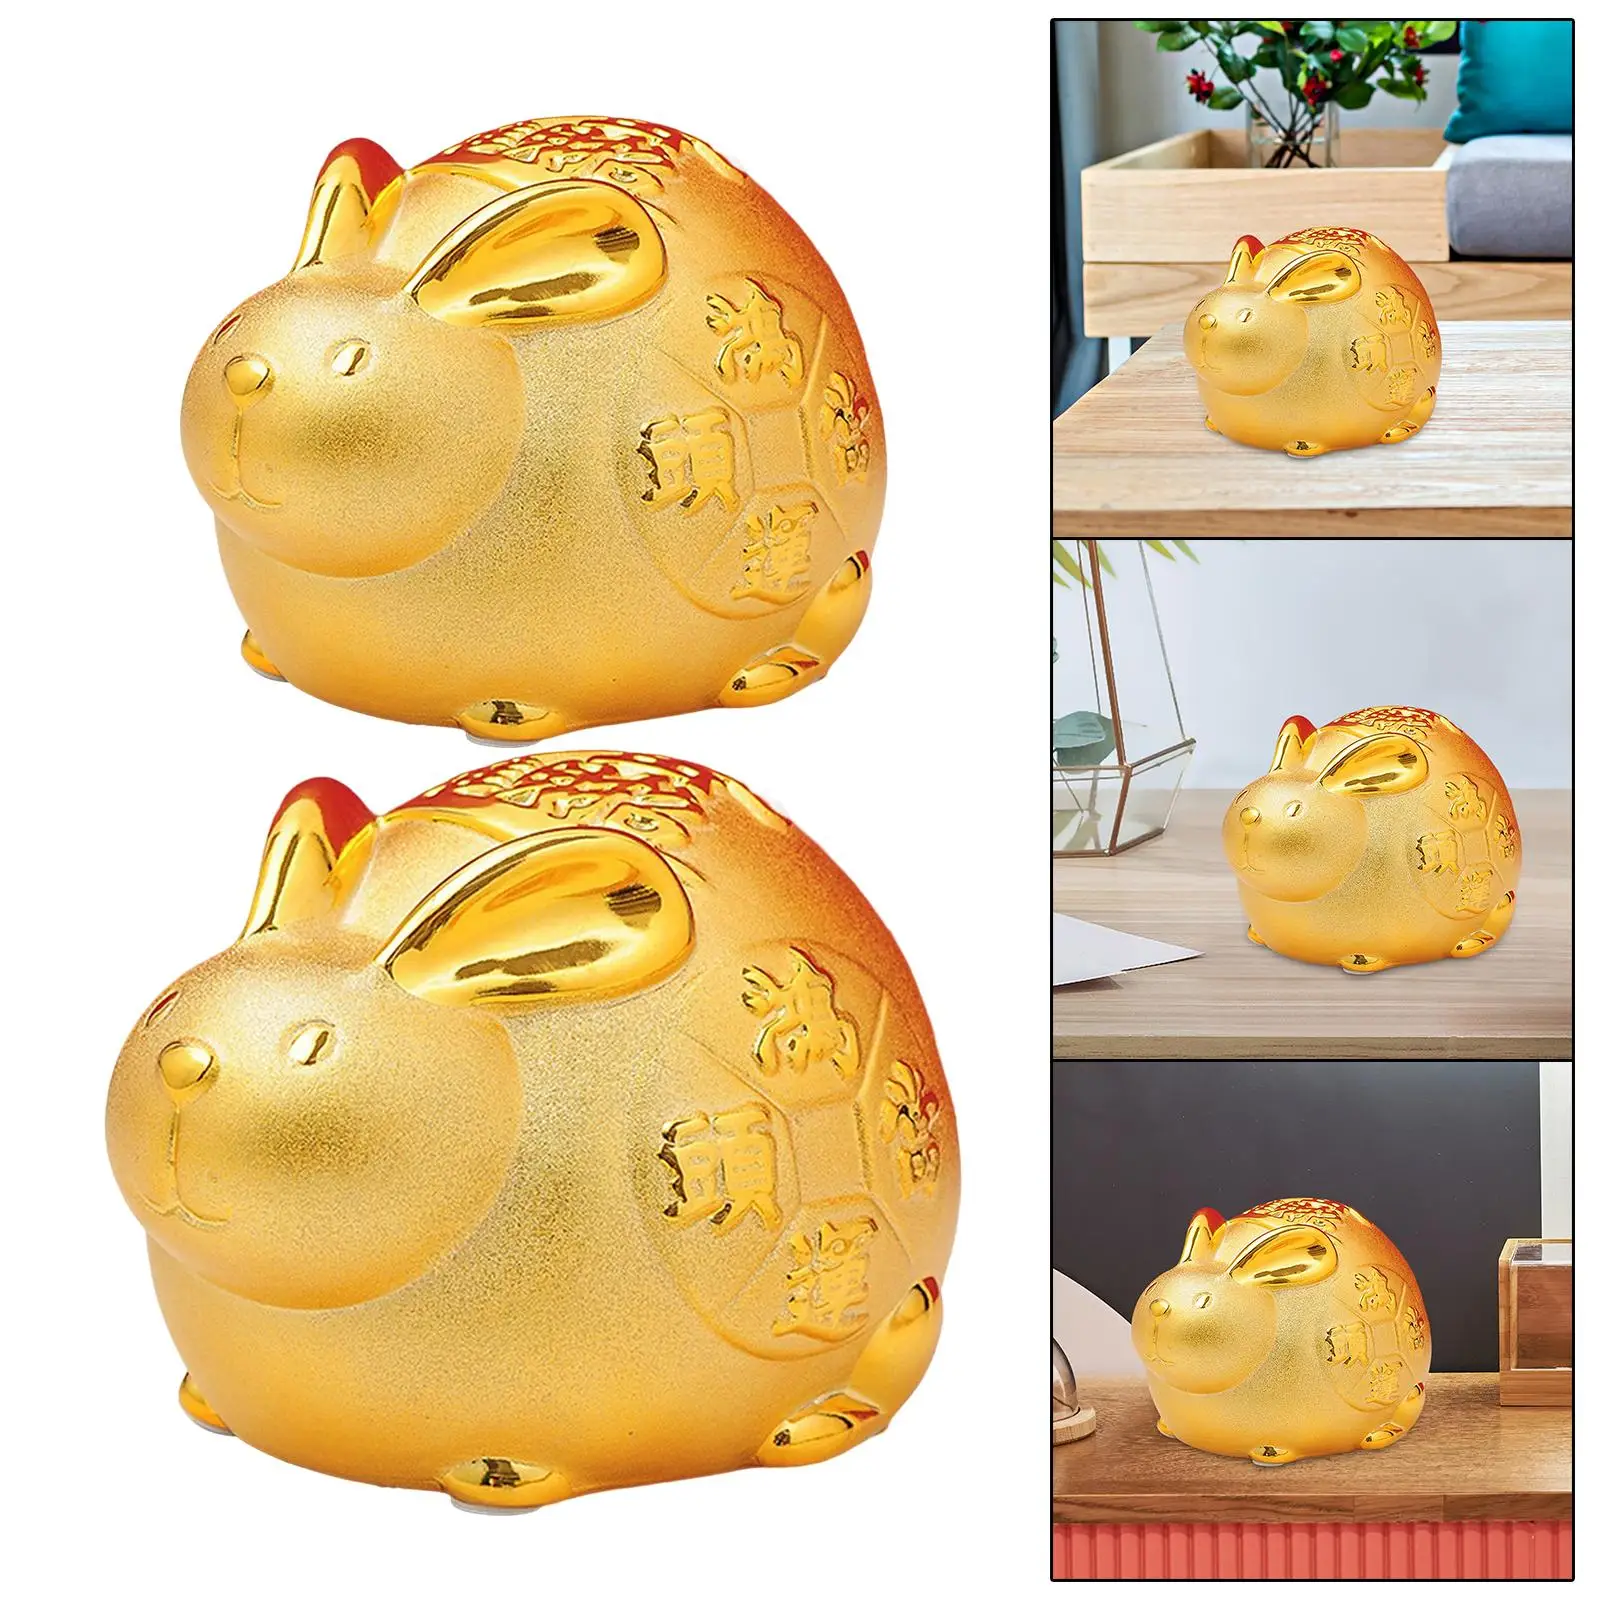 Lucky Rabbit Piggy Bank Bunny Figurine Money Saving Box Ornament Collectible Tabletop Statue for Home Decoration Easter Gifts